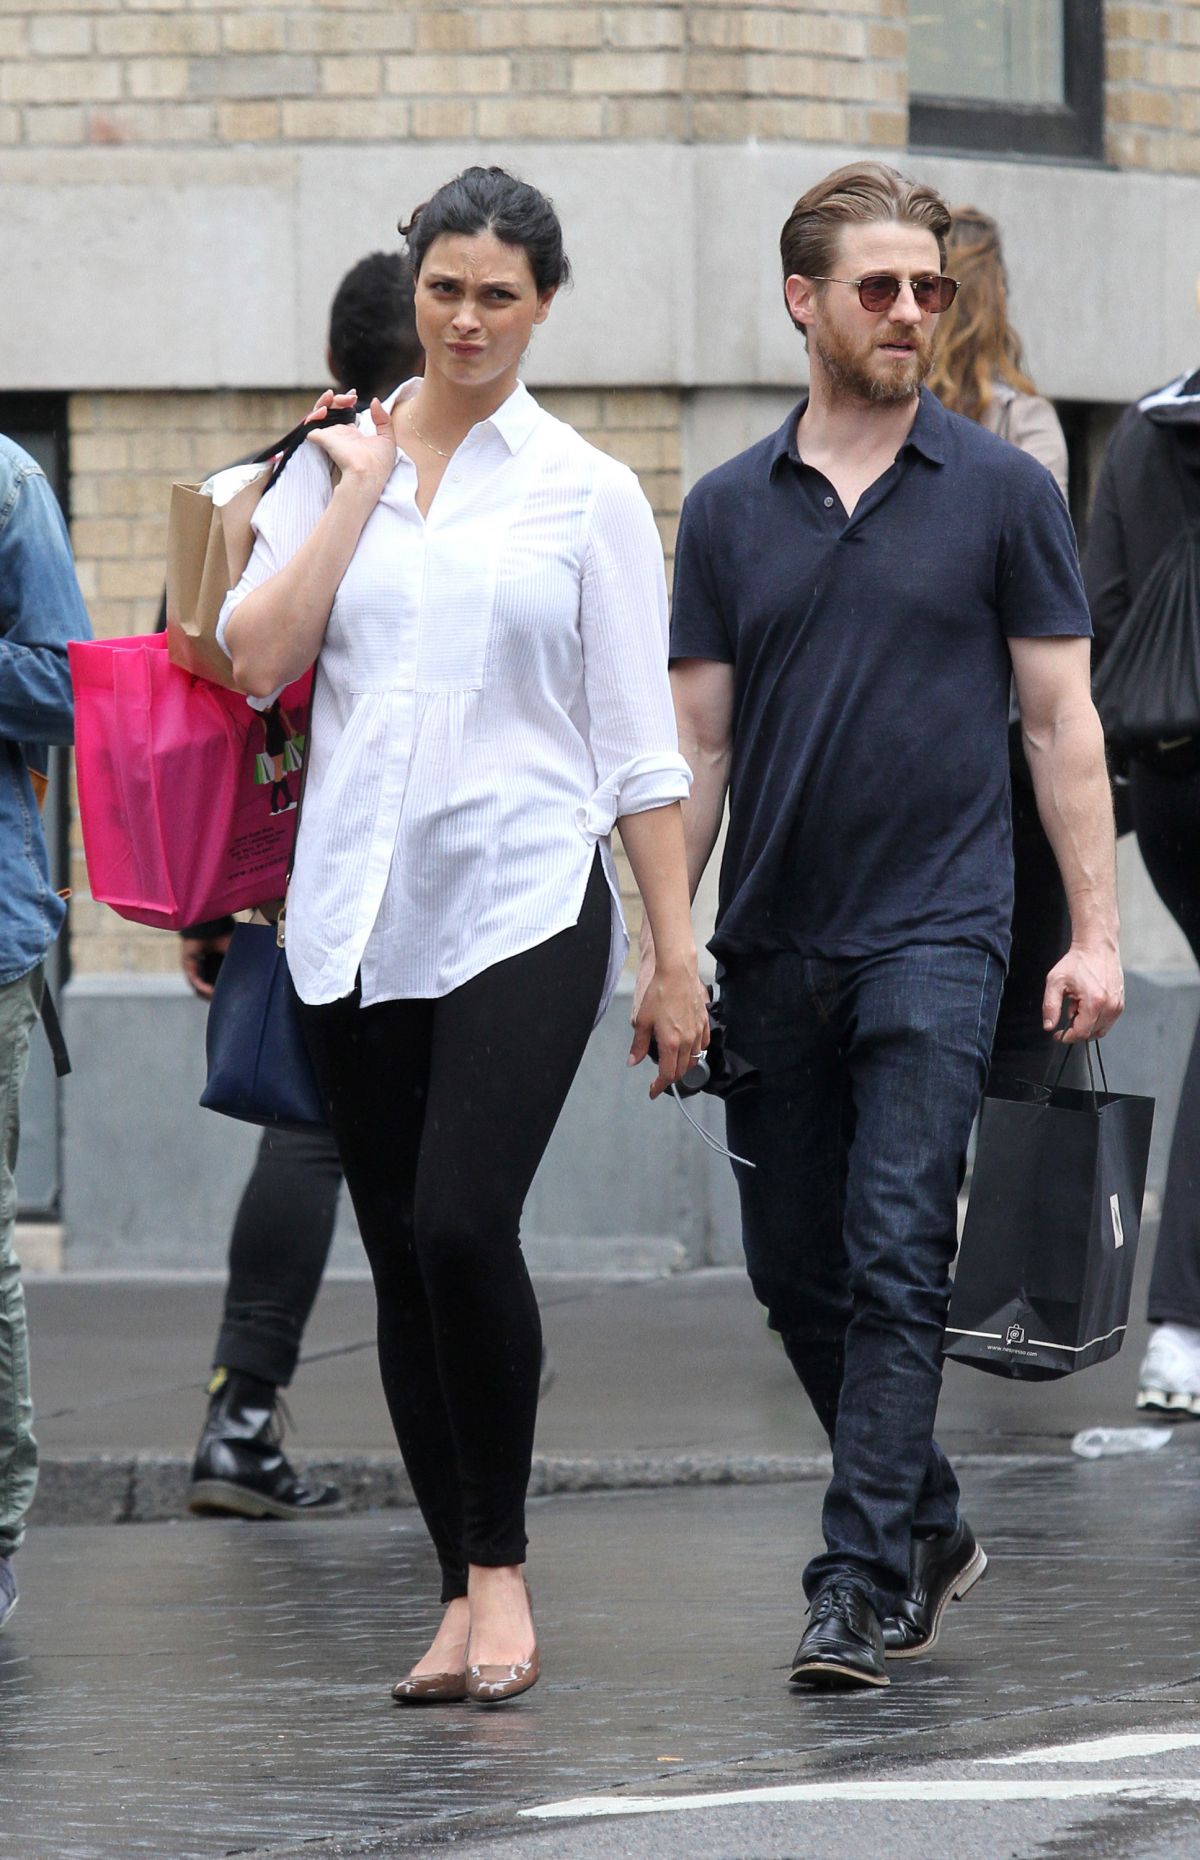 Morena Baccarin And Ben Mckenzie Out In New York 06 03 2016 6 